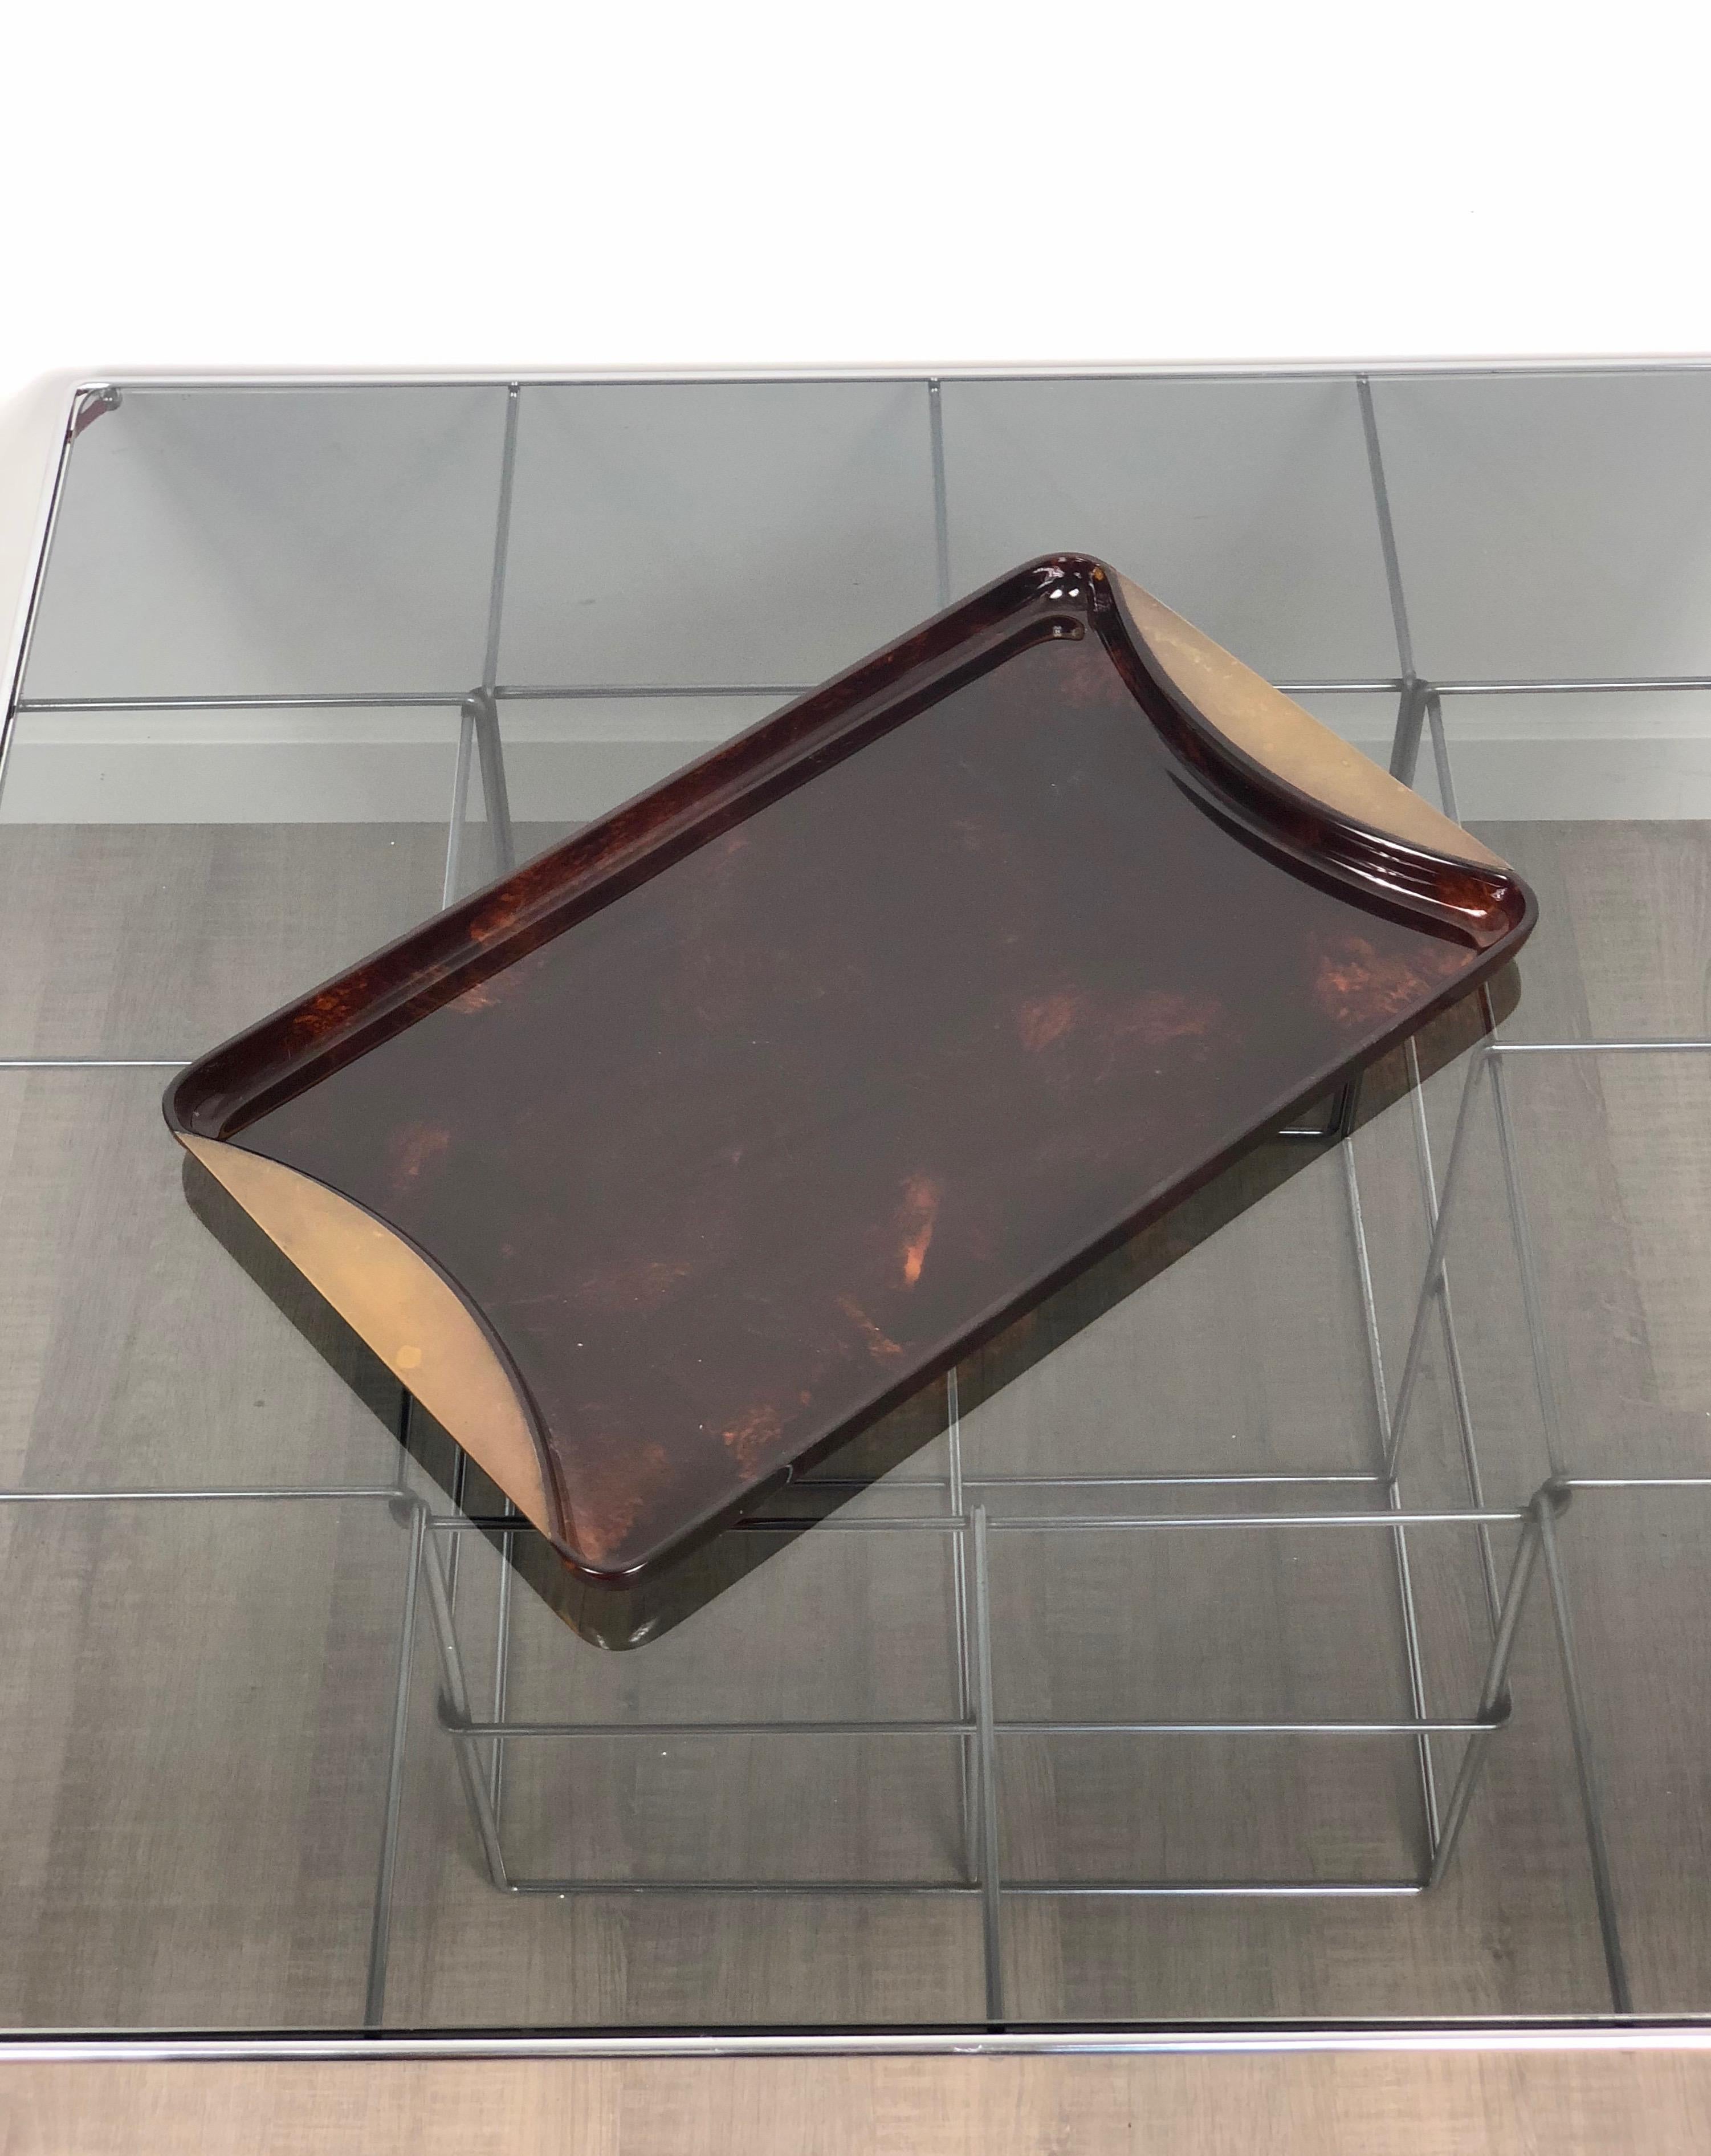 Mid-Century Modern Tortoiseshell Serving Tray in Lucite and Brass by Guzzini, 1970s, Italy